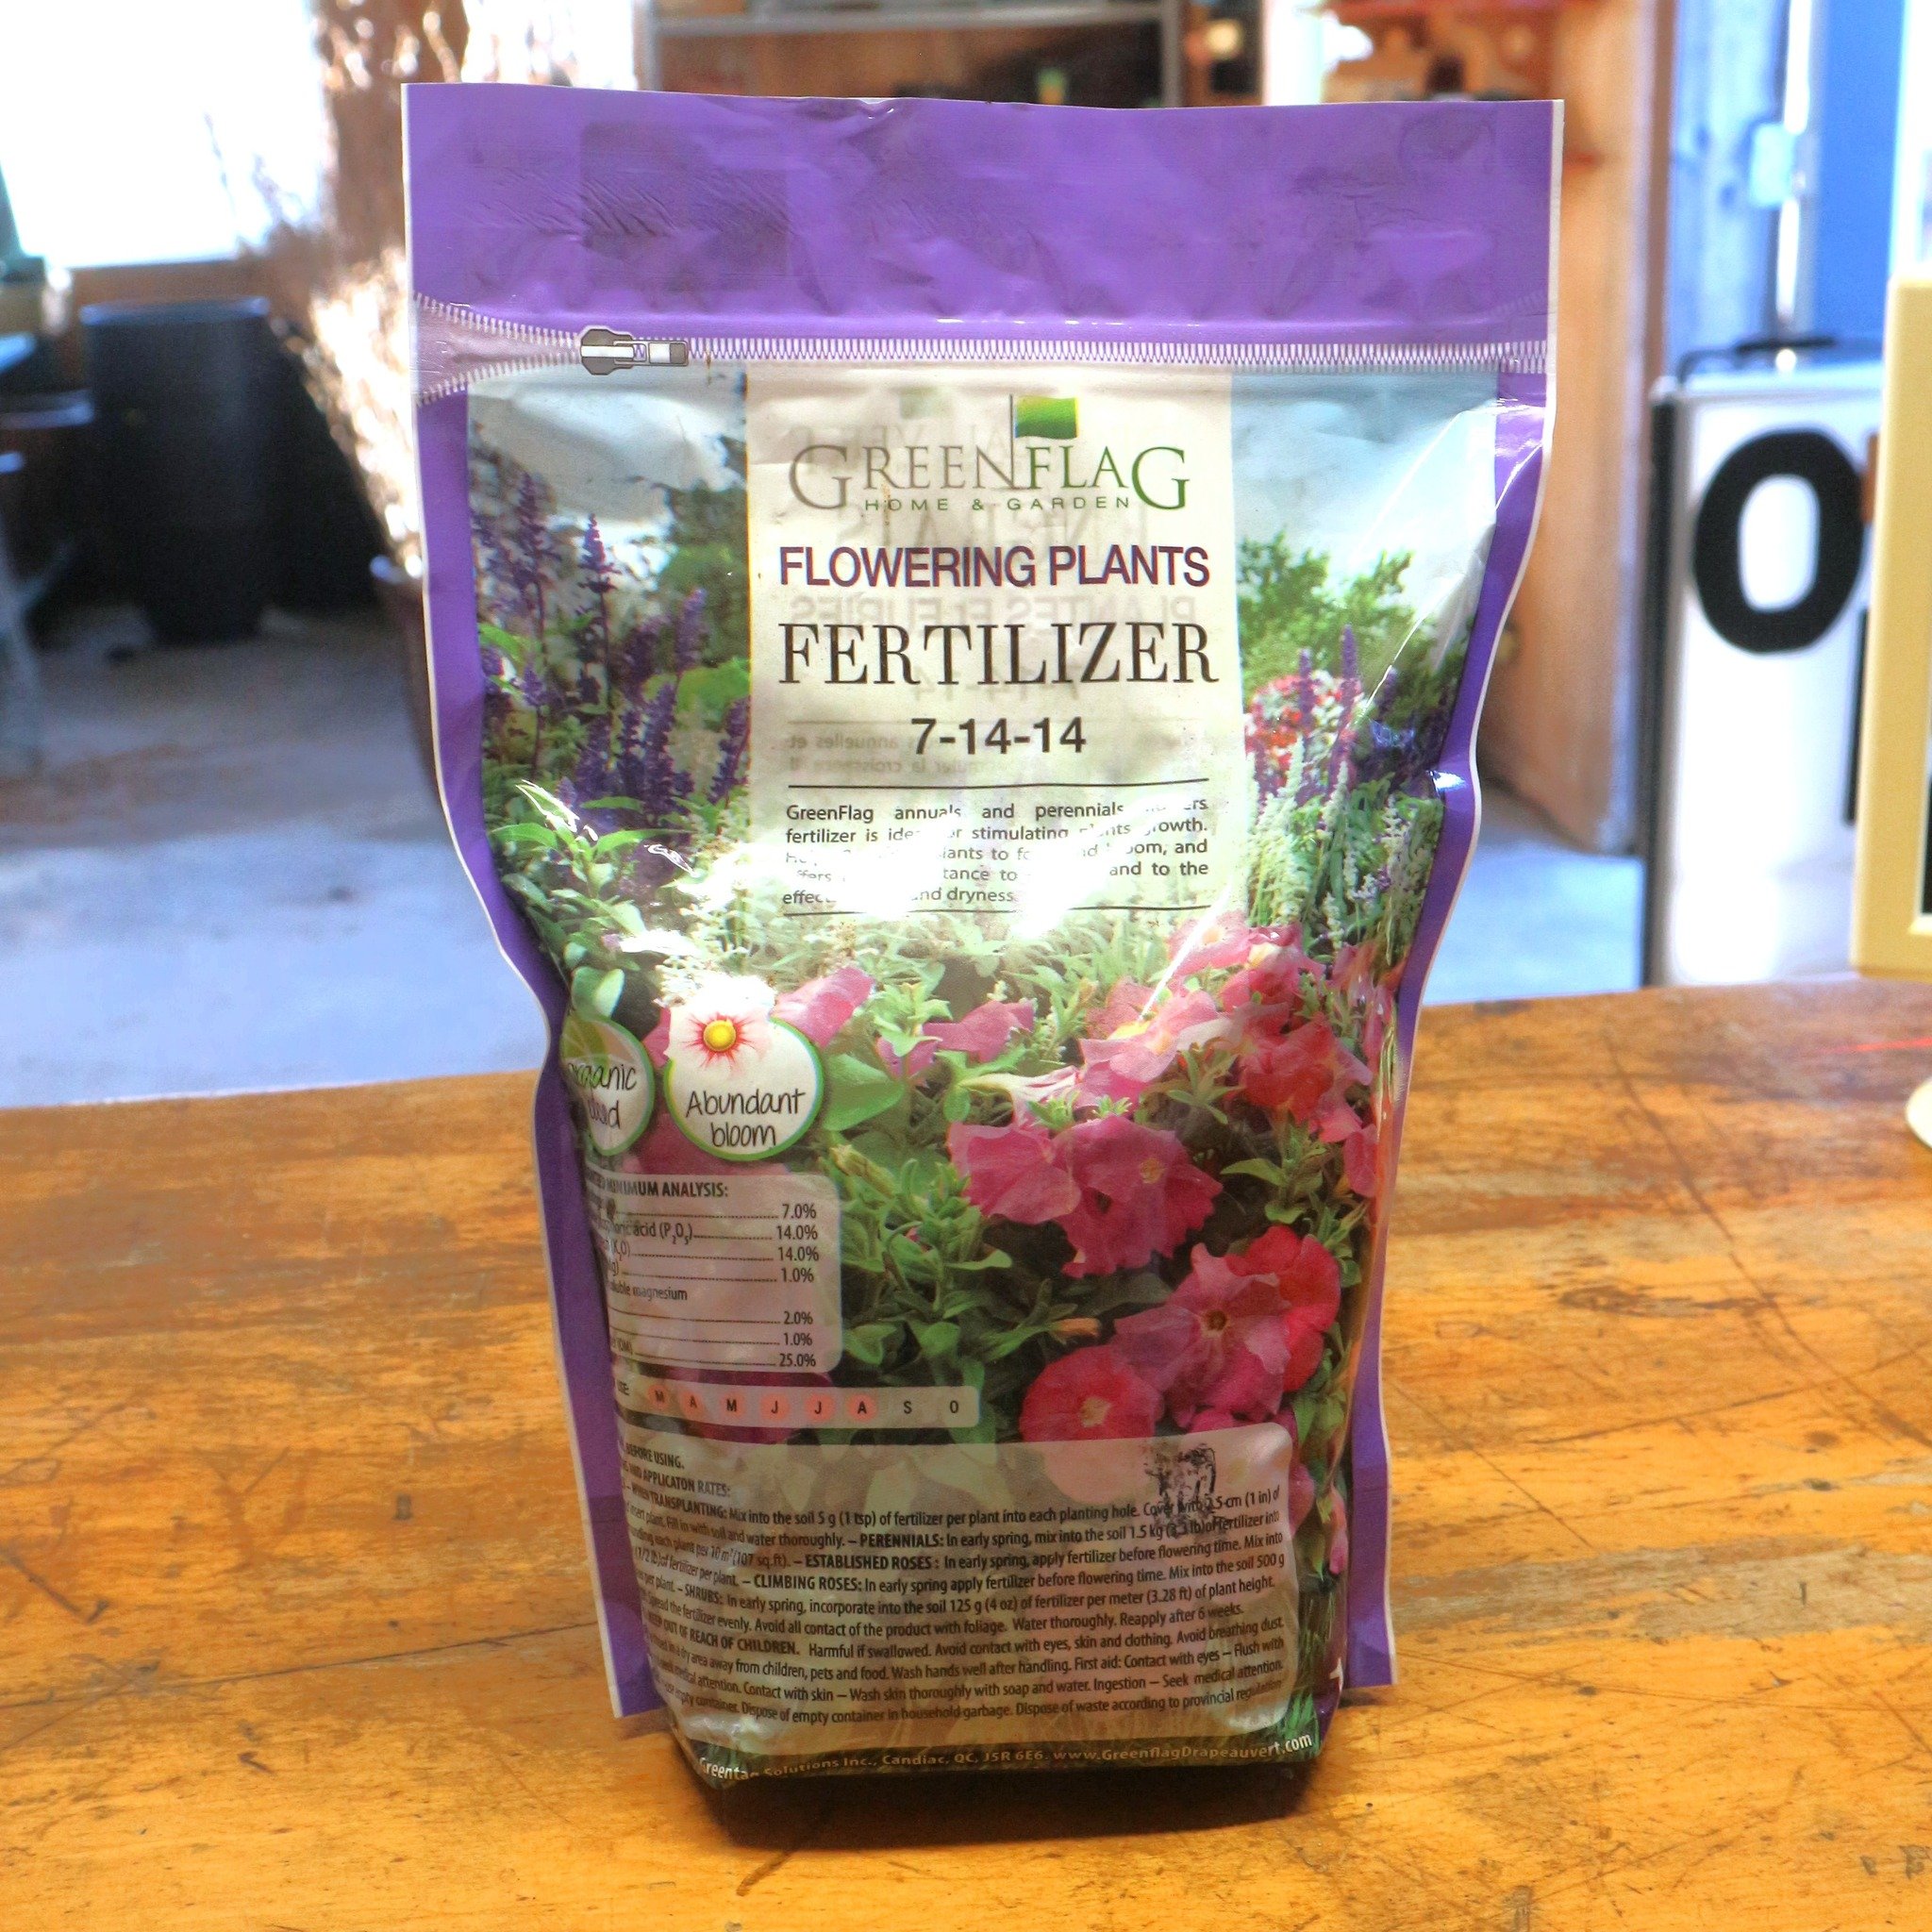 Green Flag Flowering Plants Fertilizer - your garden's secret to blooming brilliance! 🌺🌿 Specially formulated to nourish and support flowering plants, our fertilizer provides the essential nutrients they need to produce vibrant, long-lasting blooms